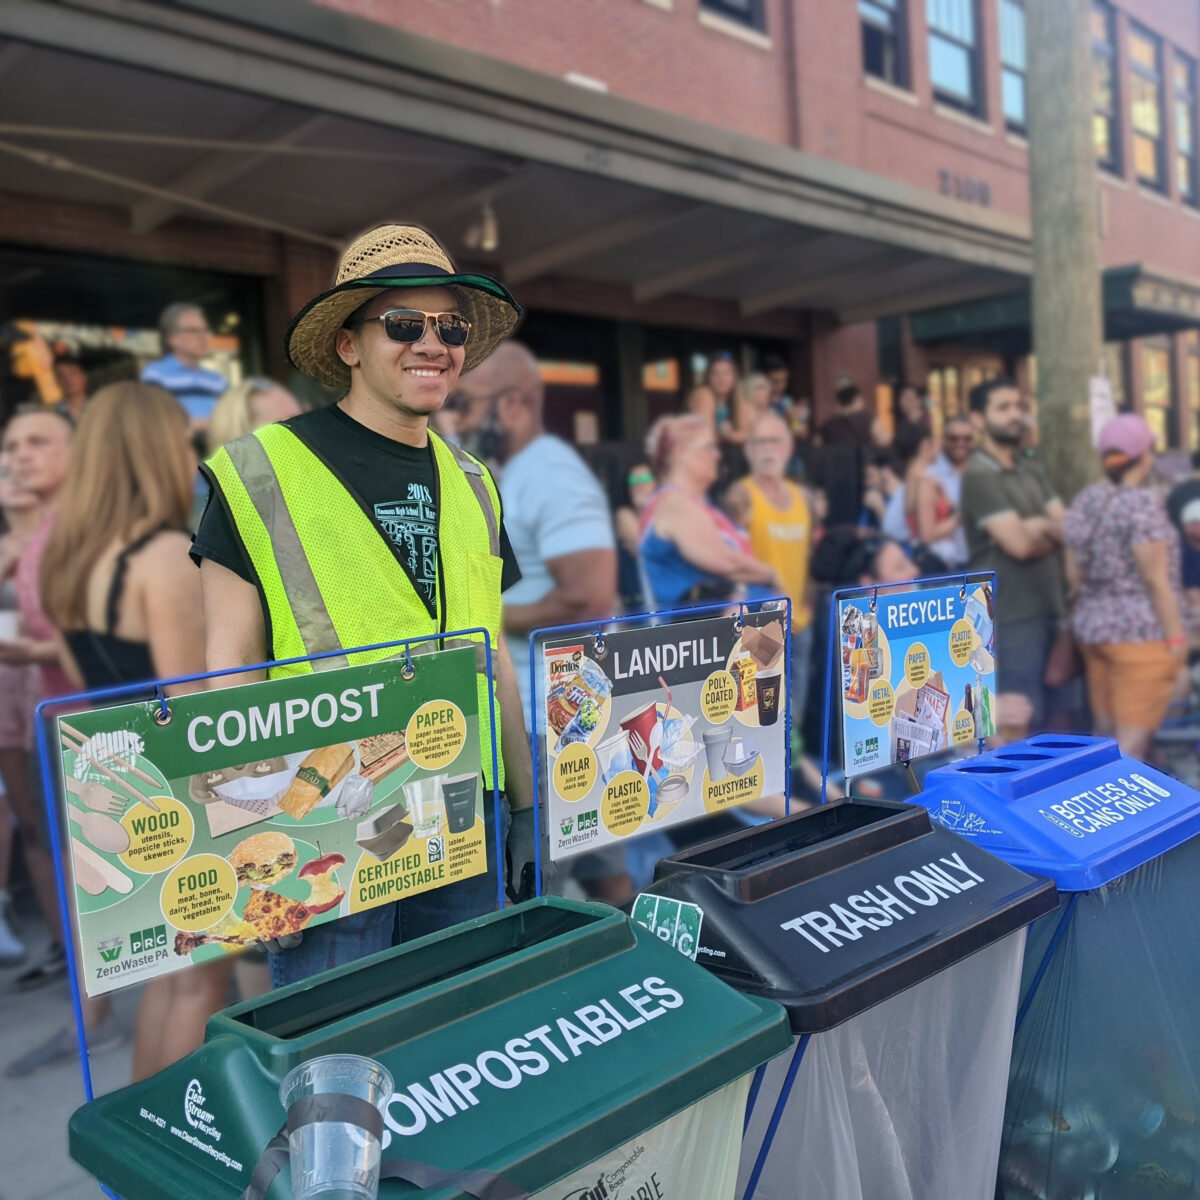 Pennsylvania Resources Council teams up with special events to reduce waste